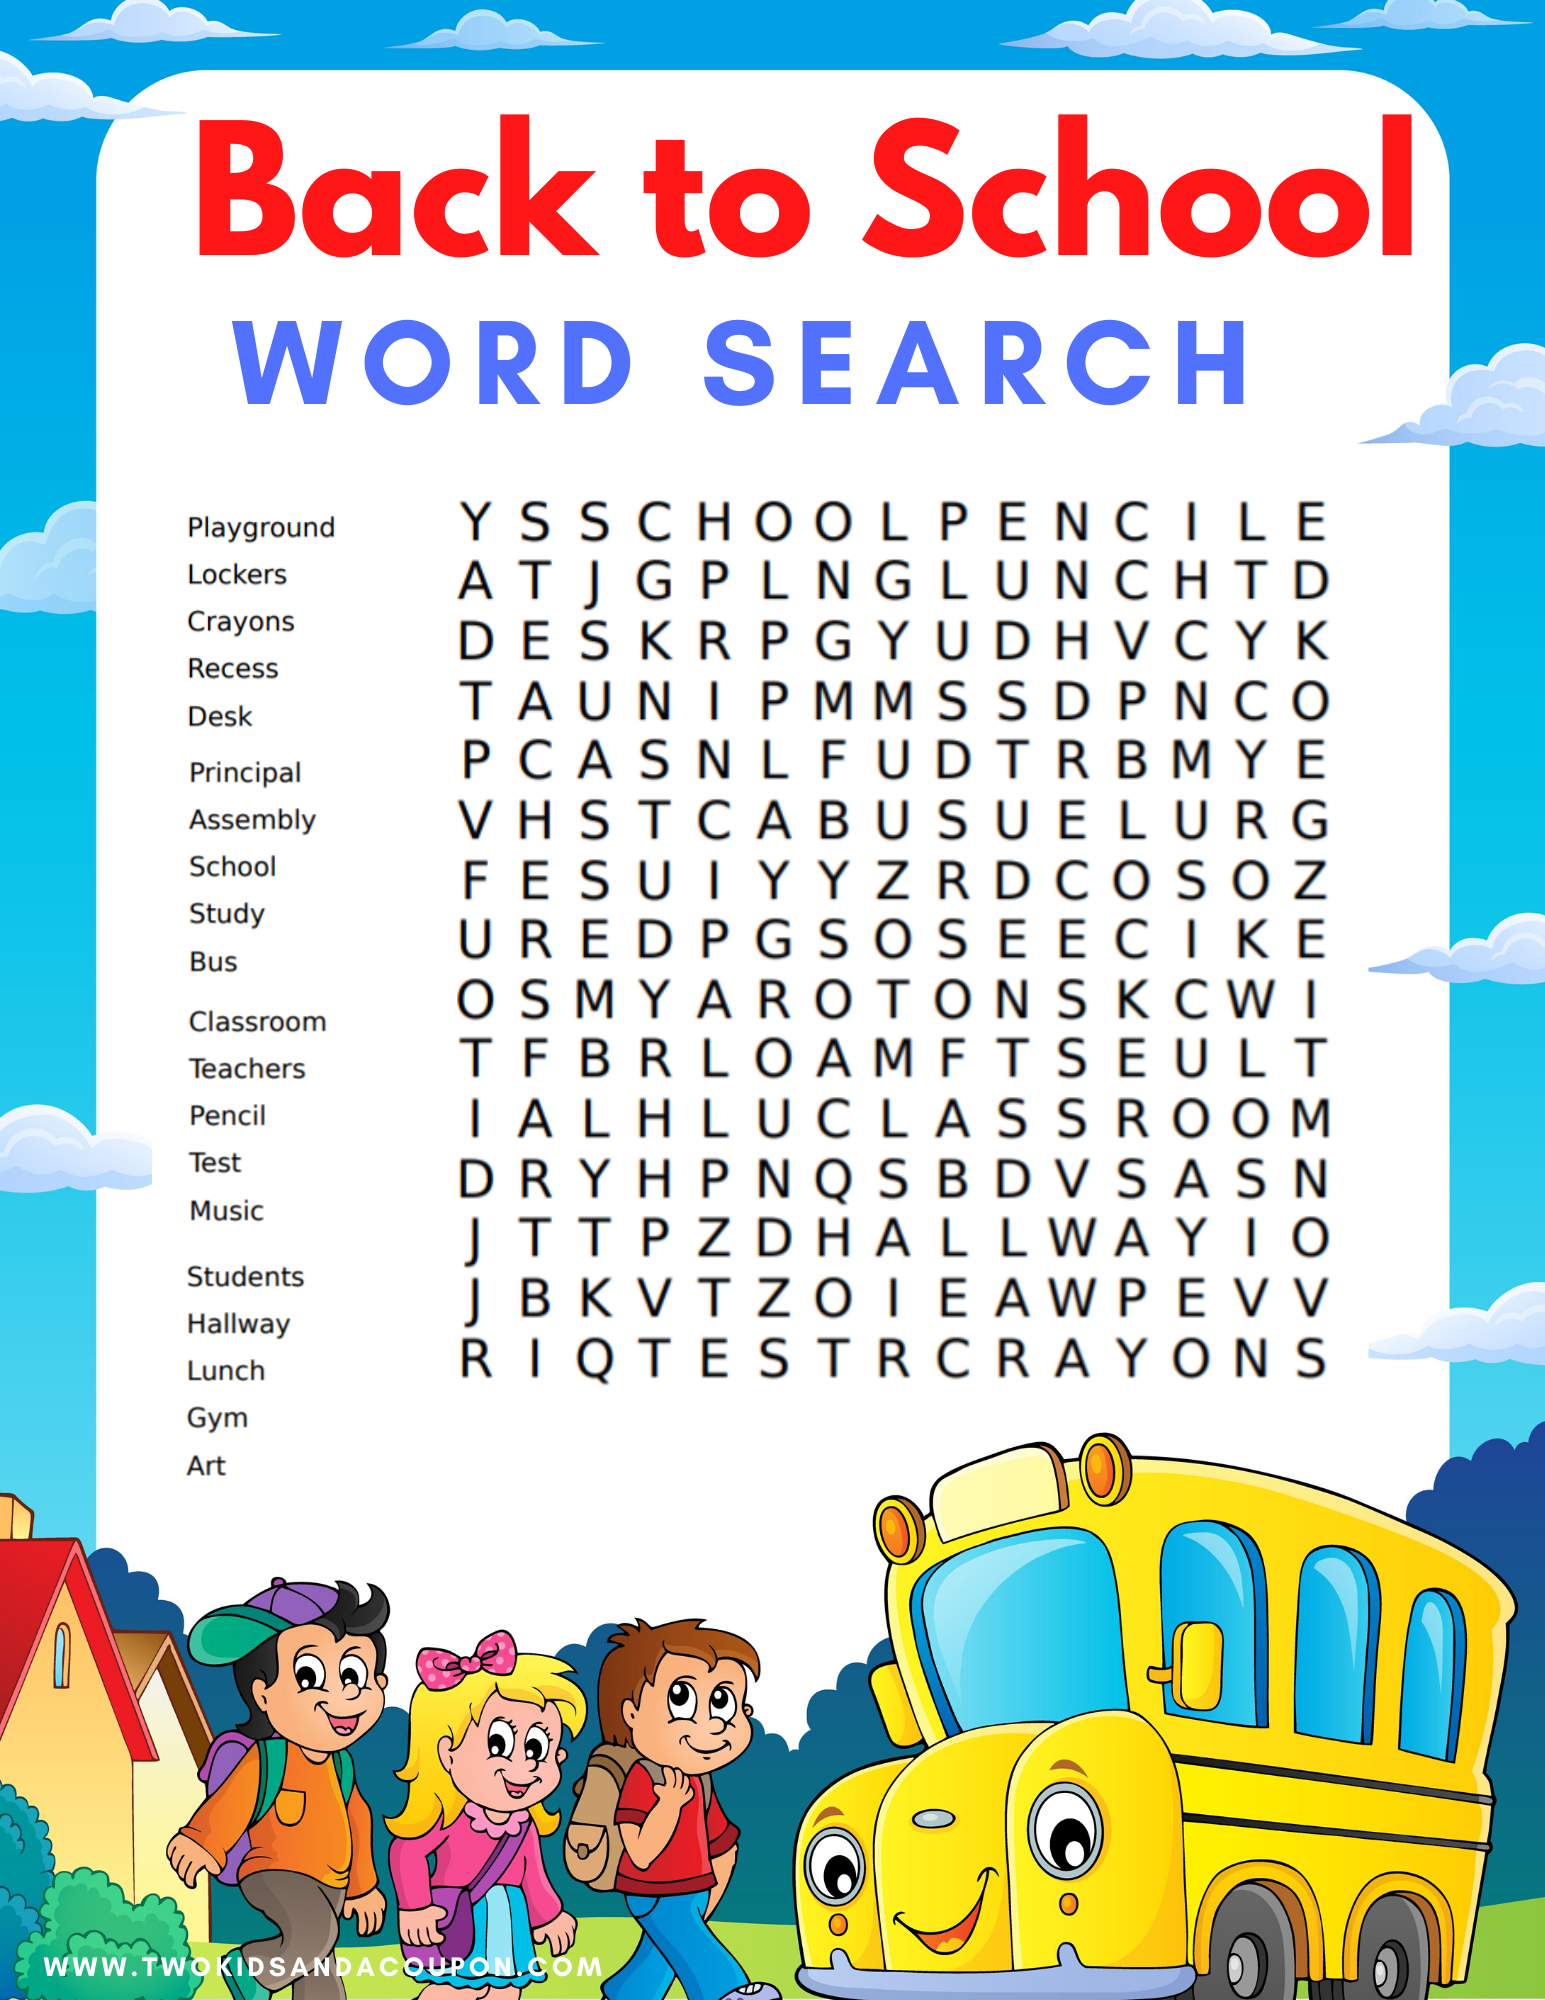 last-day-of-school-word-search-printable-word-search-printable